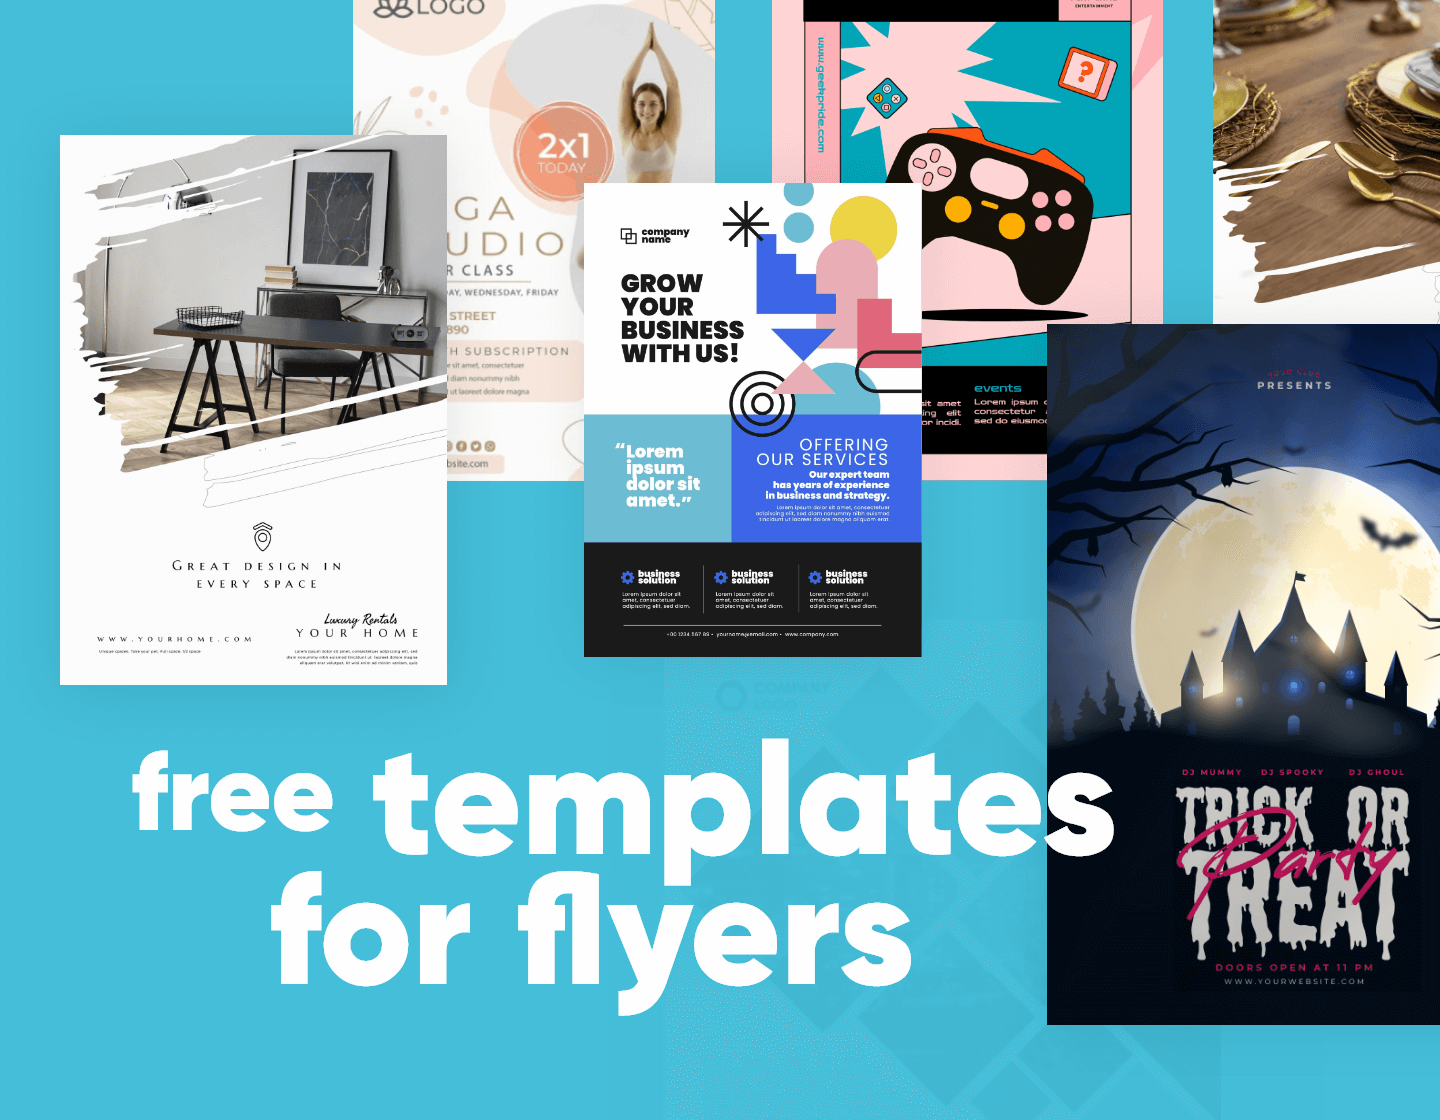 50 Free Templates For Flyers To Customize And Print For Every Occasion - Create Flyers Online Free Printable